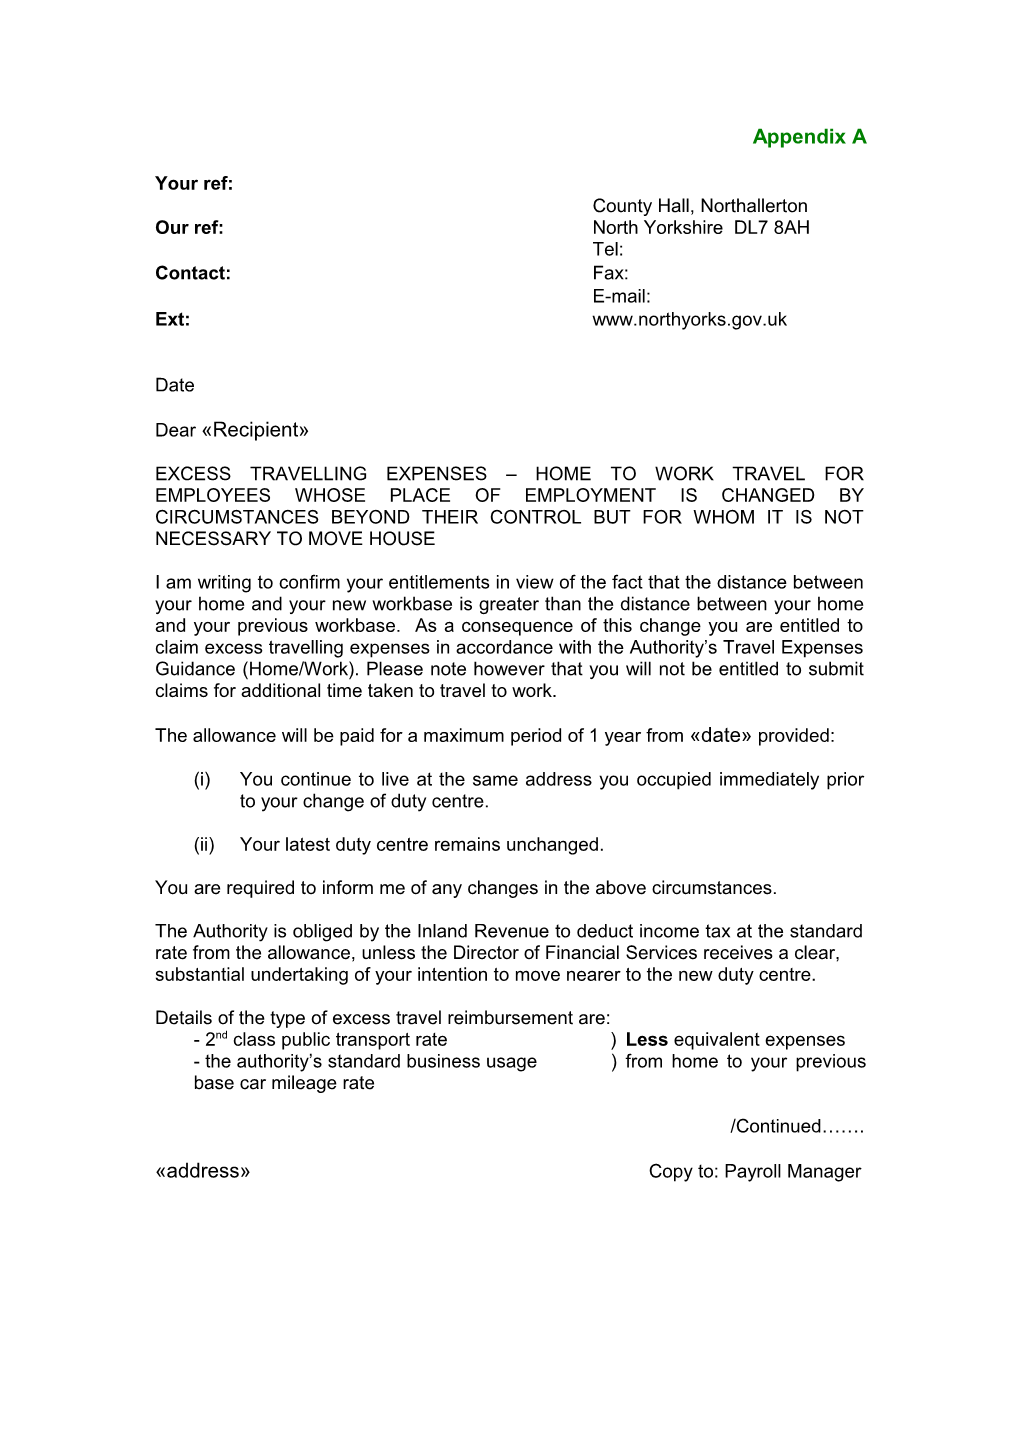 Home to Work Travel Letter Appendix A